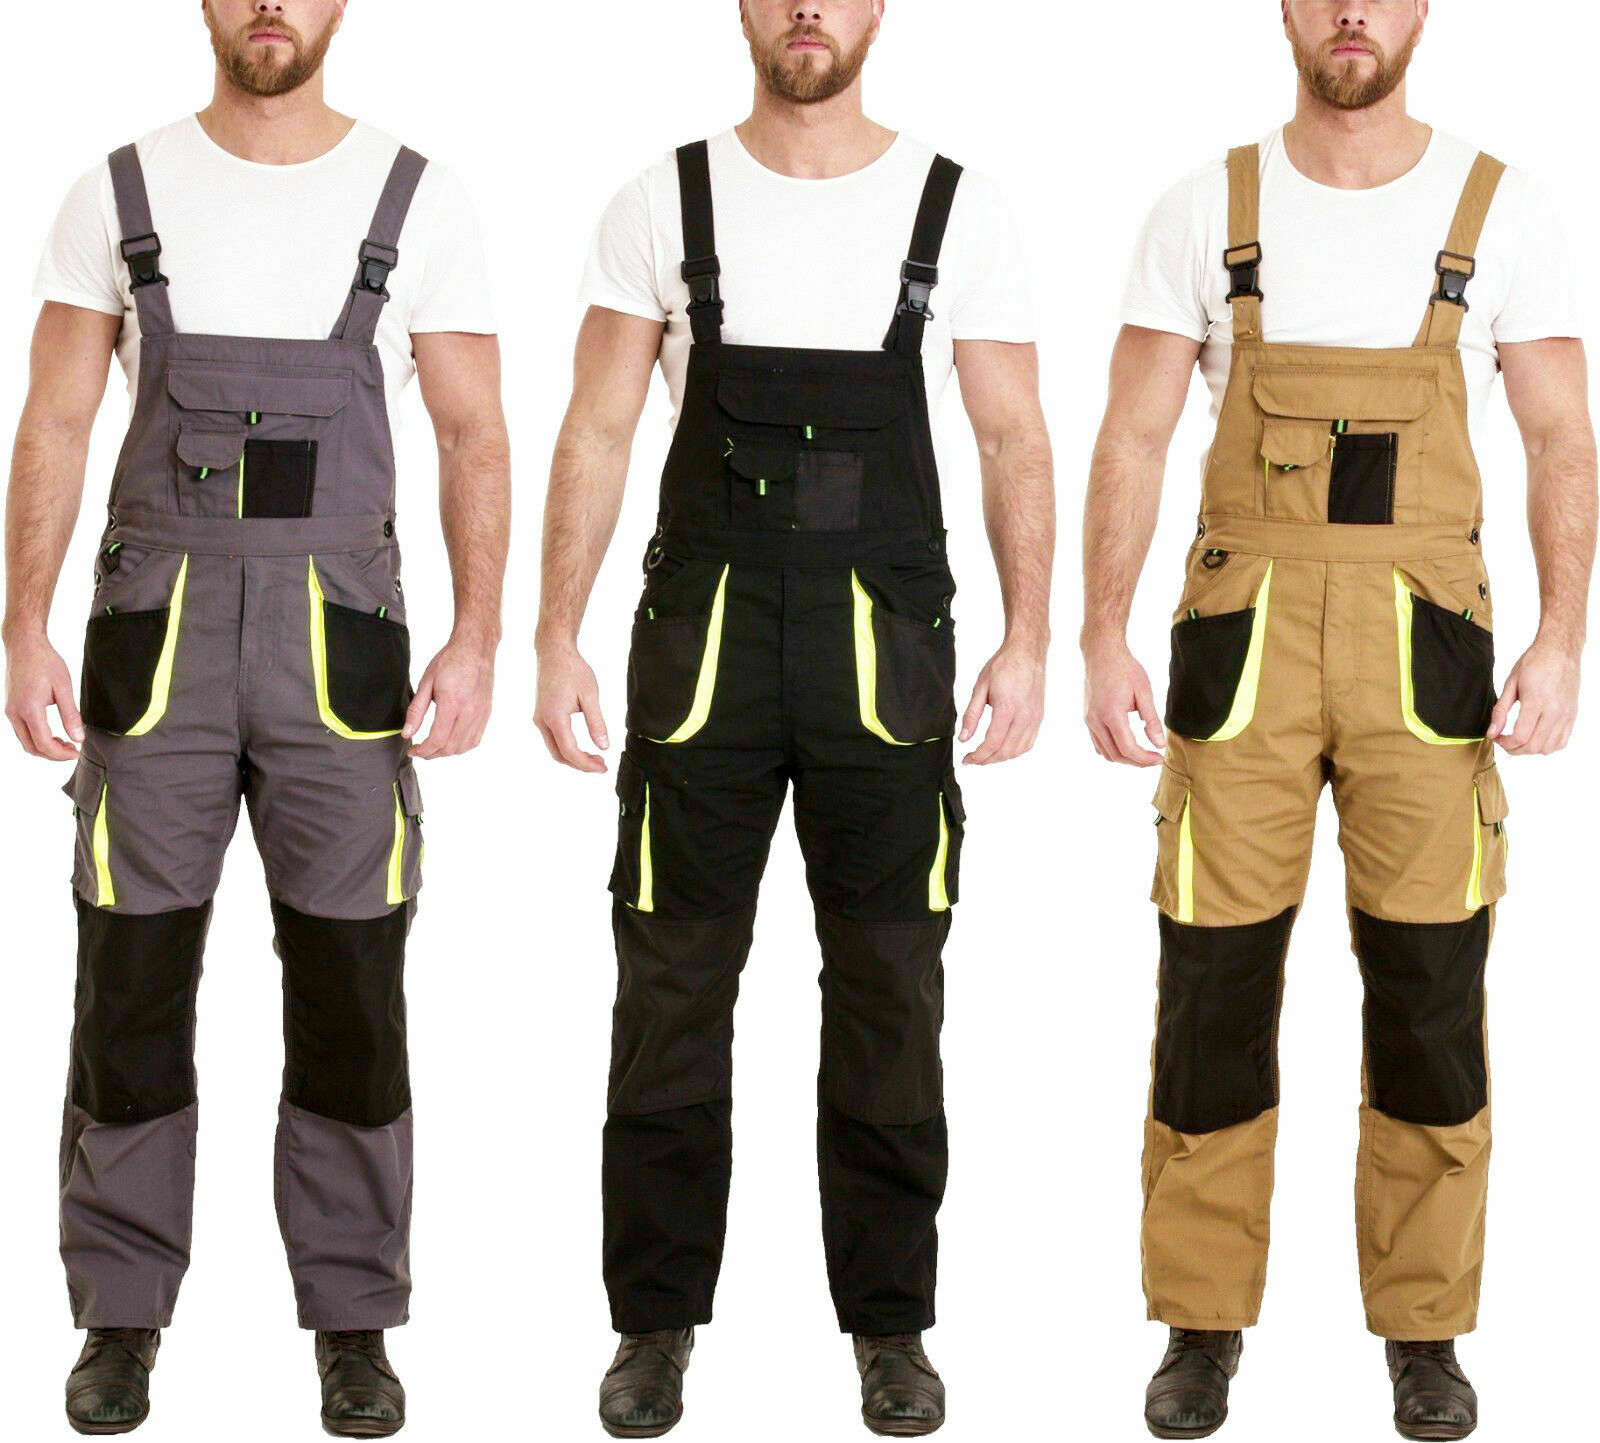 Mens Work Dungarees Bib And Brace Overall Working Trousers Multi Pockets Pants